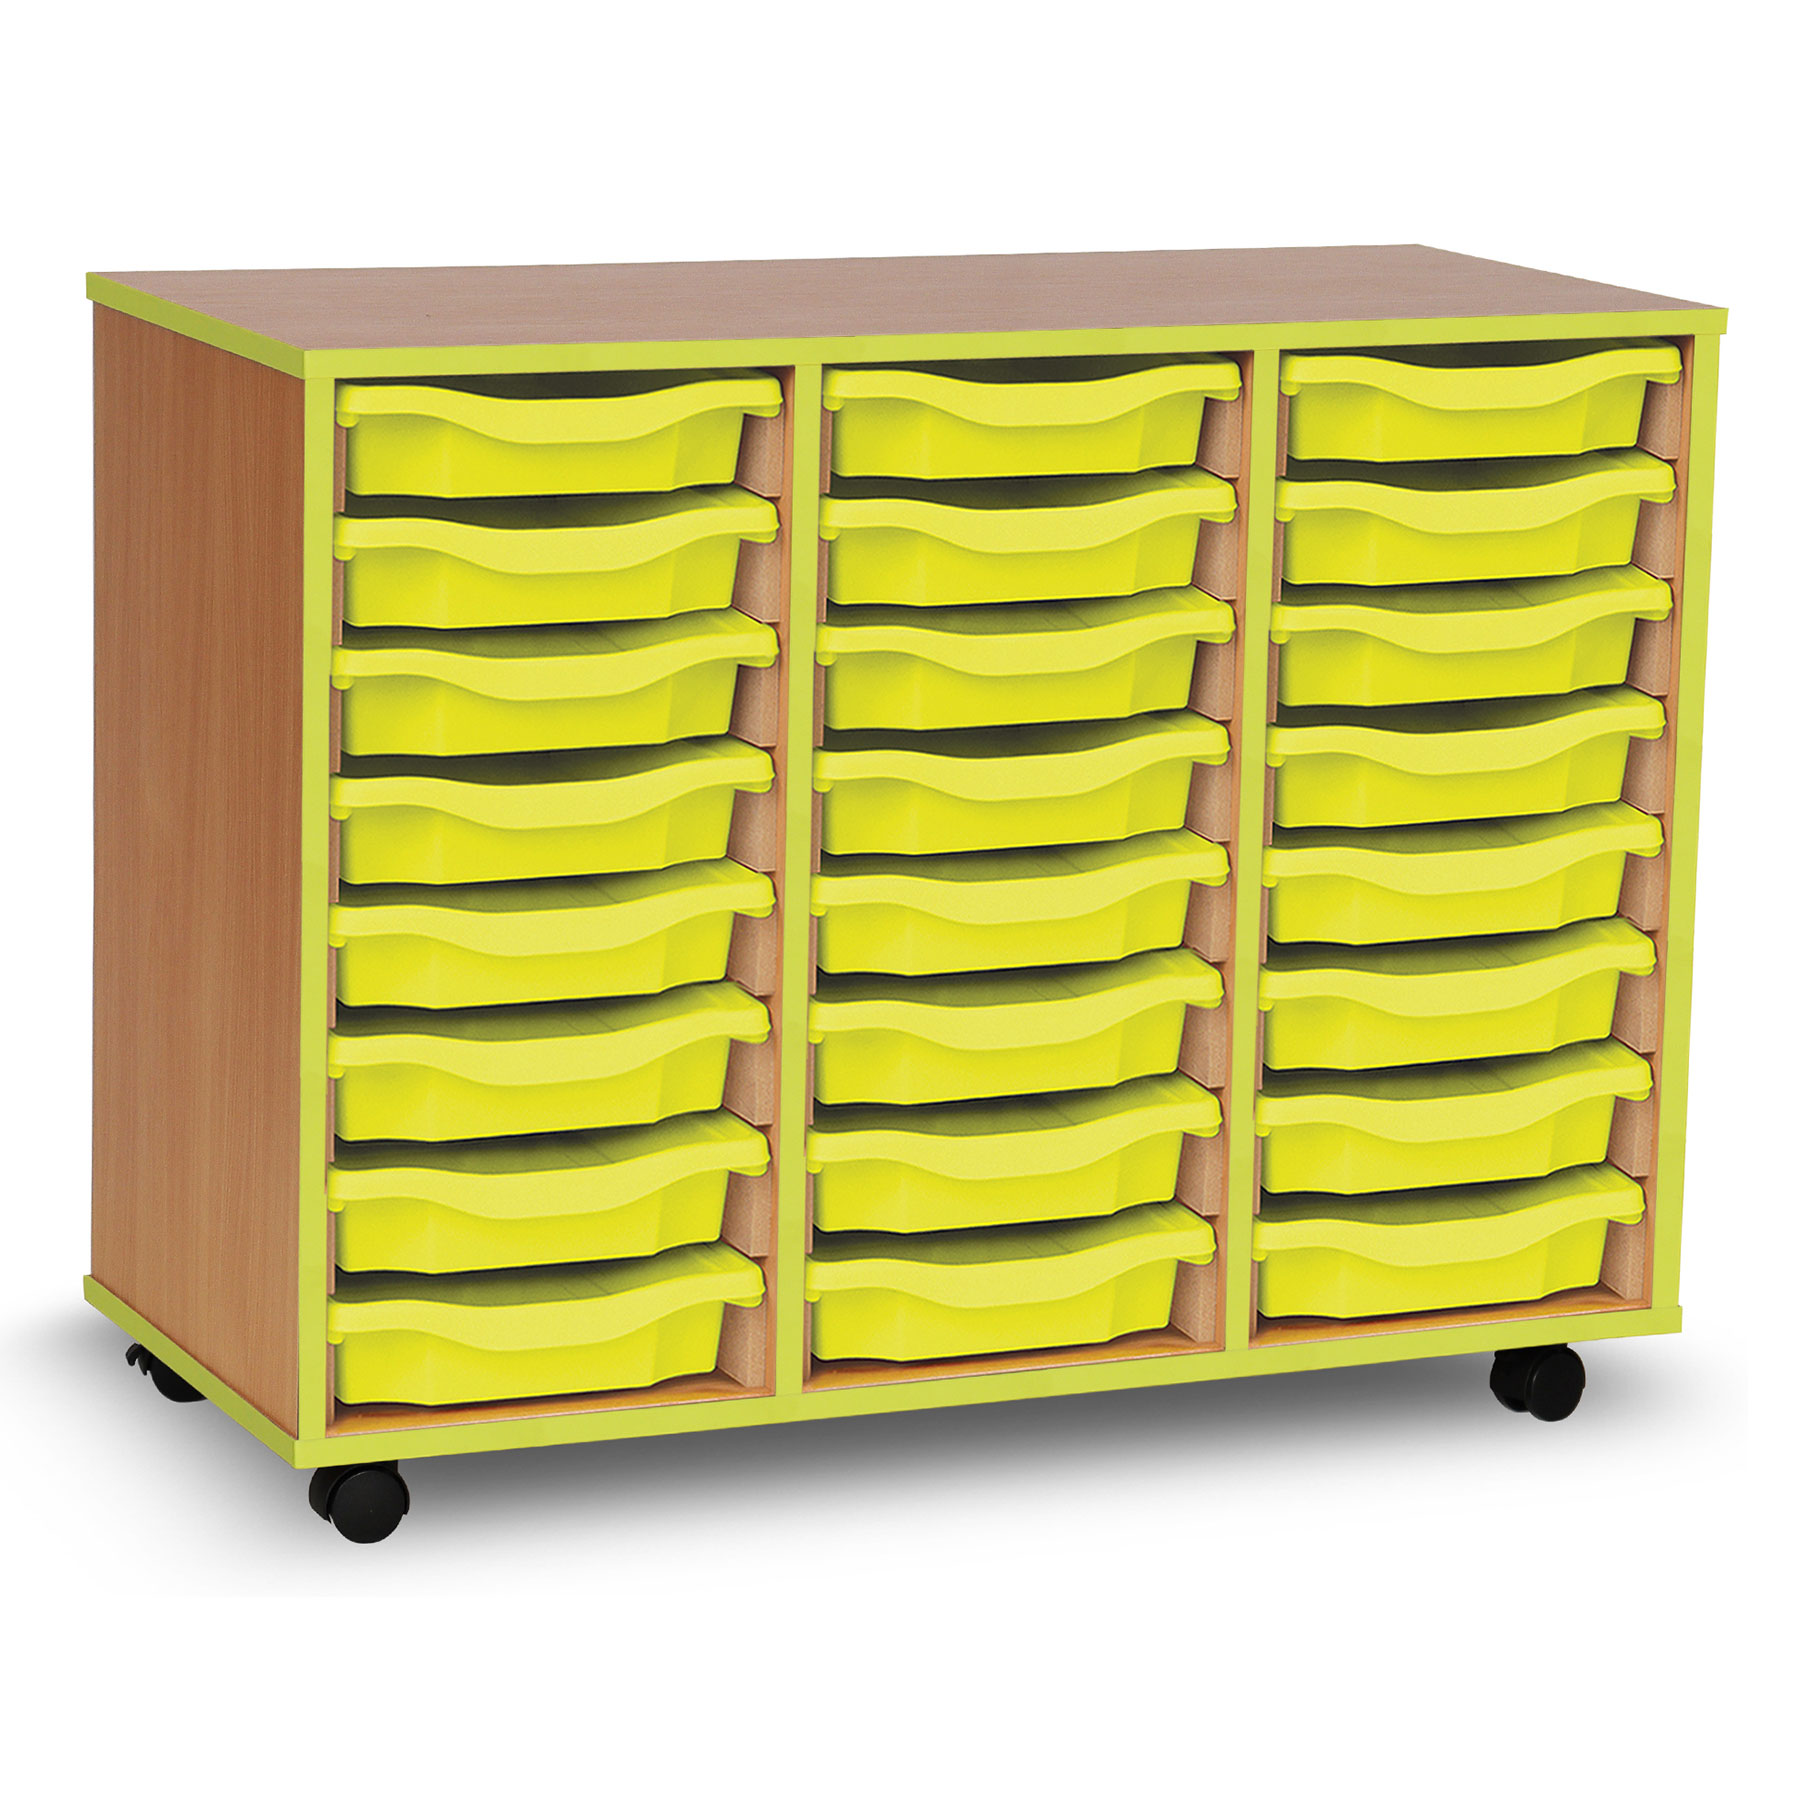 24 Single Tray Unit with Lime Edging, Castors & Lime Trays